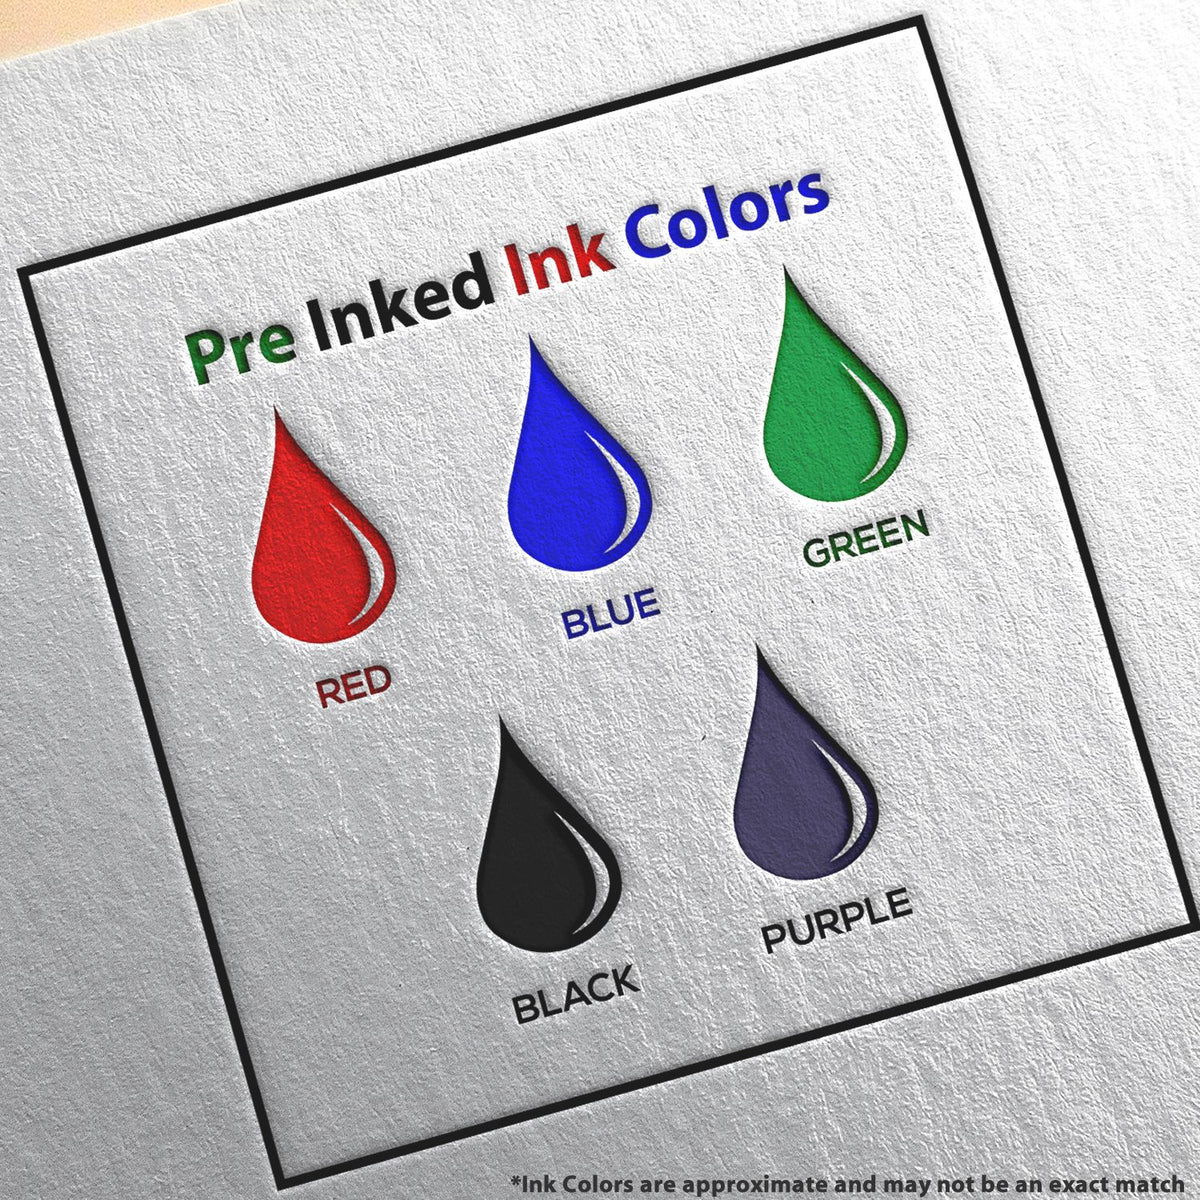 A picture showing the different ink colors or hues available for the Premium MaxLight Pre-Inked New Mexico Landscape Architectural Stamp product.